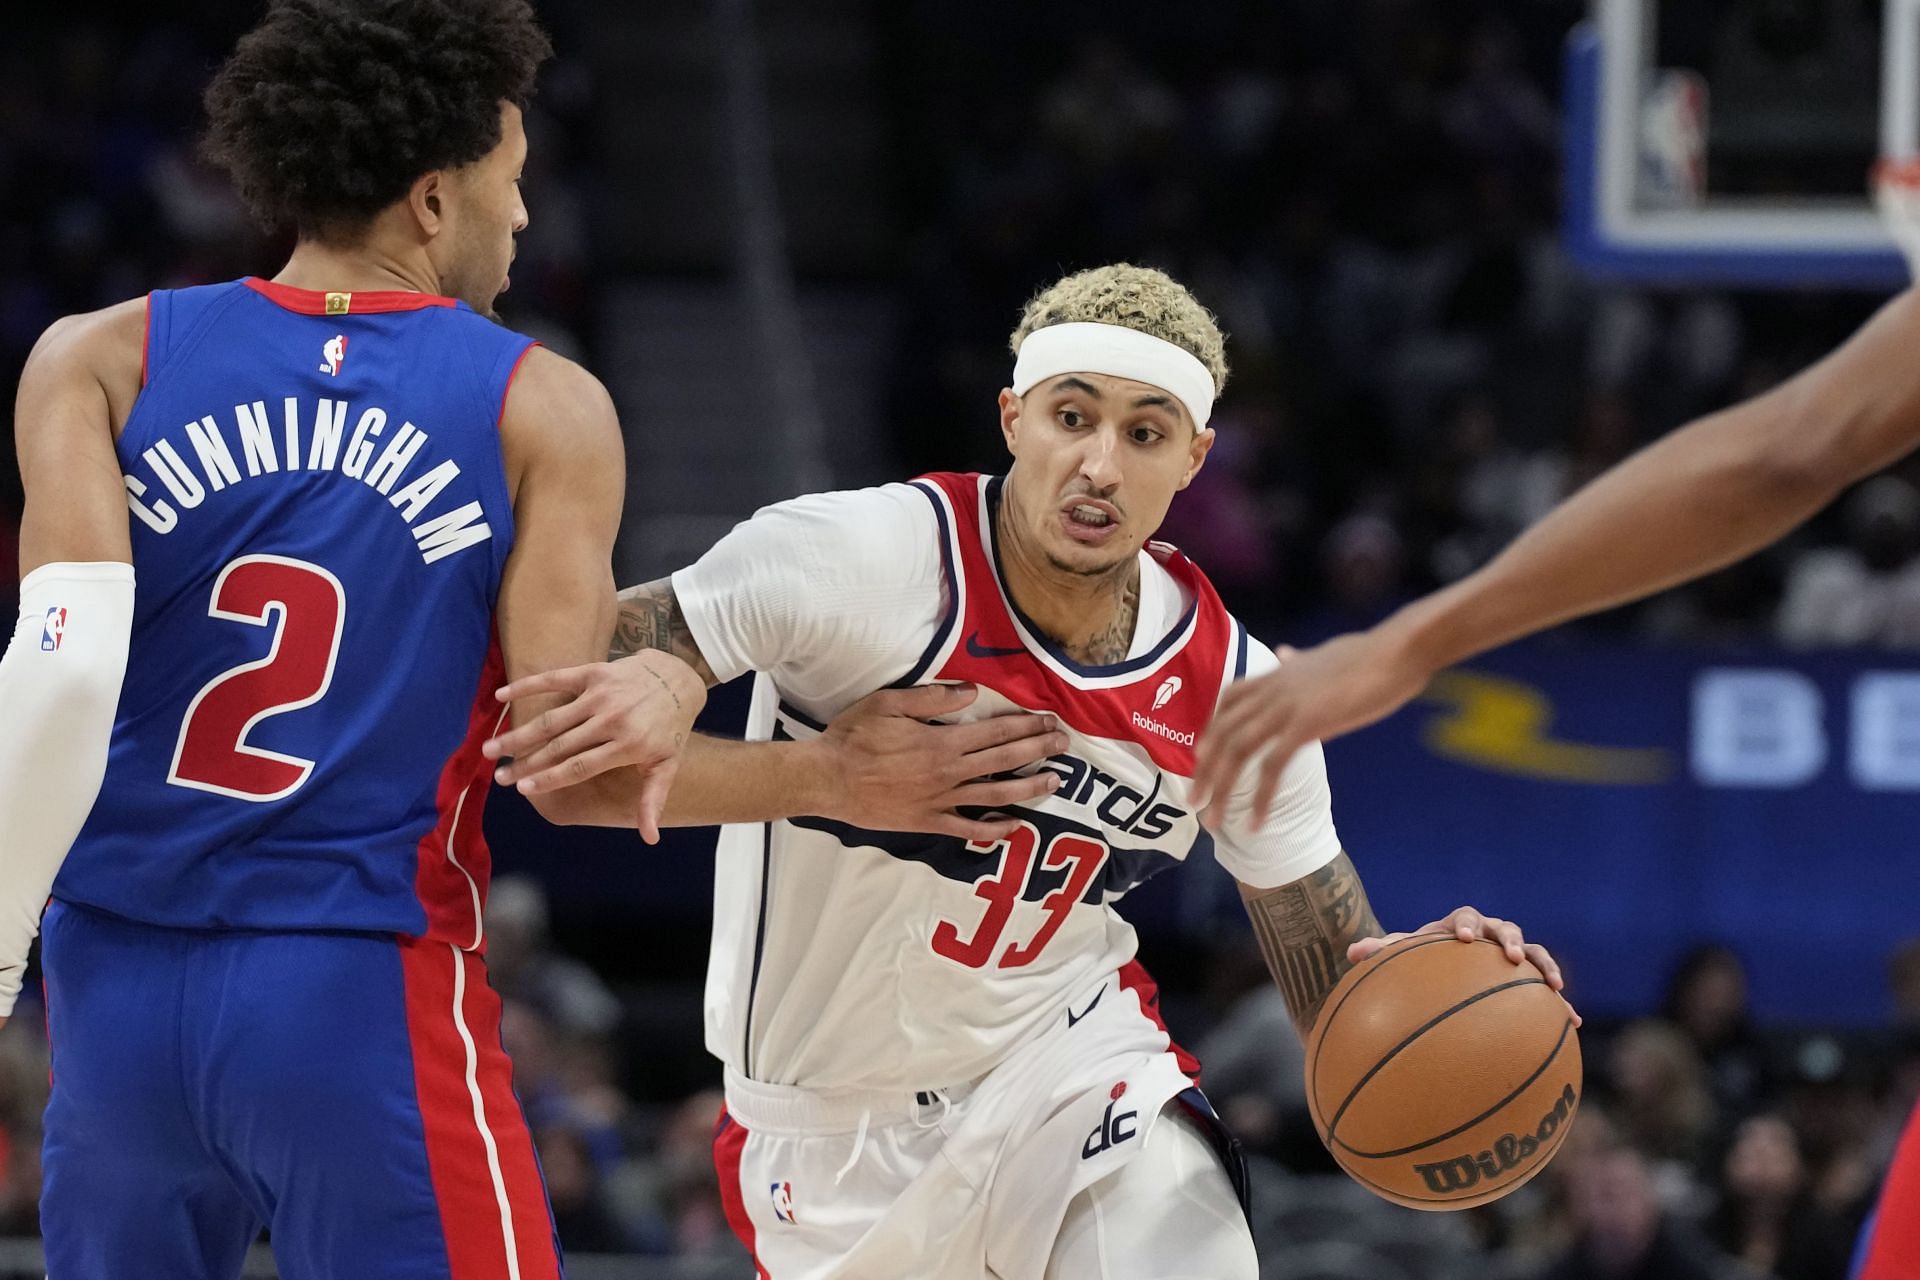 Kyle Kuzma of the Washington Wizards and Cade Cunningham of the Detroit Pistons